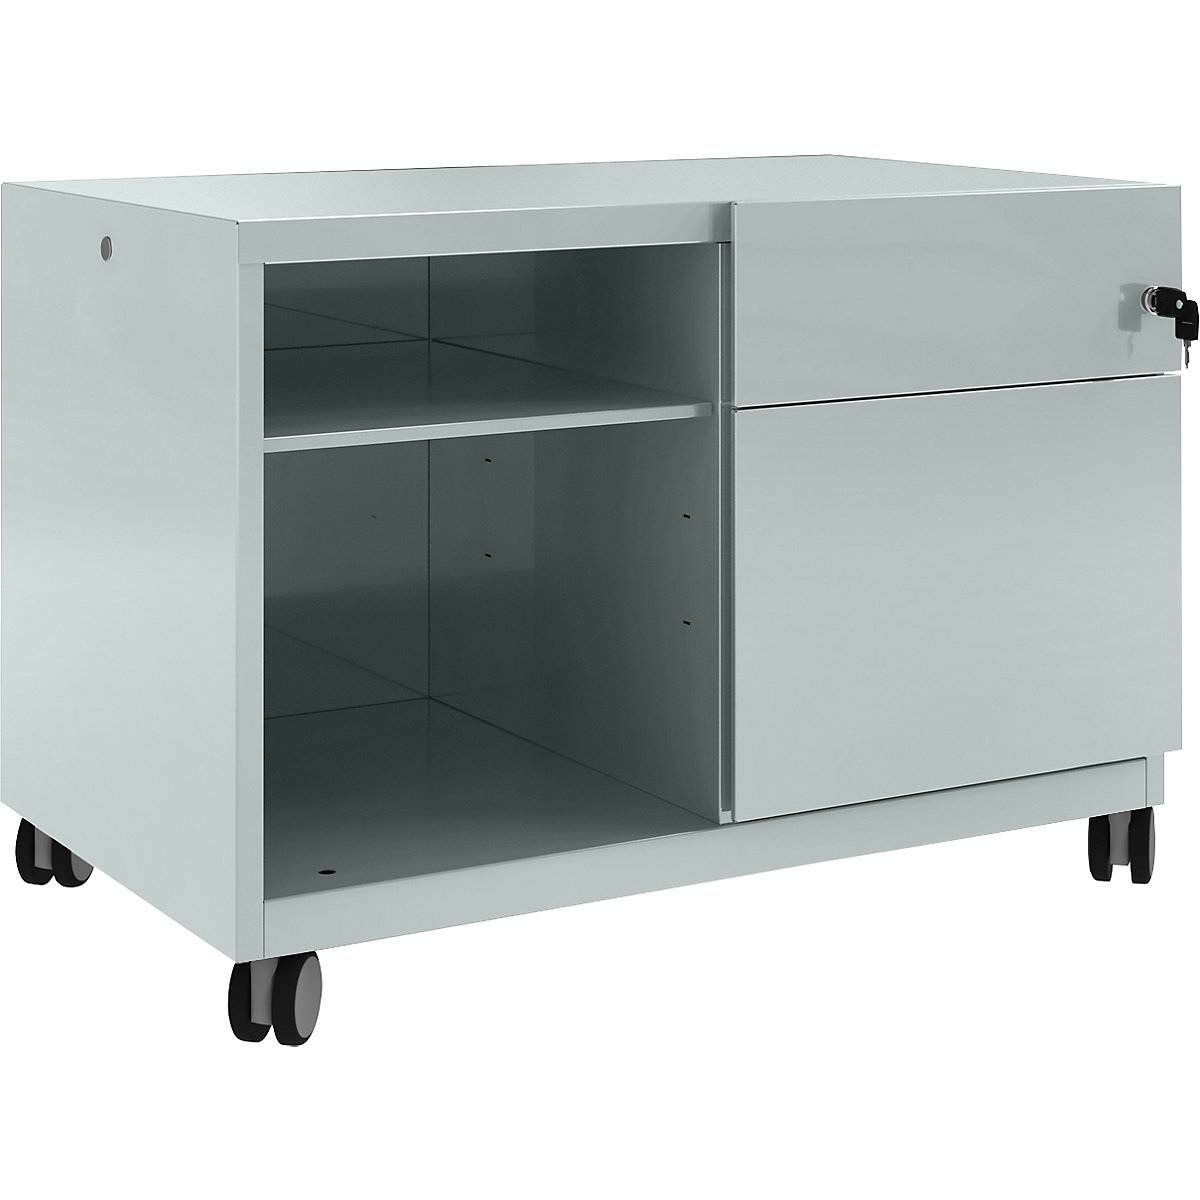 Chariot Note&trade; CADDY, h x l x p 563 x 800 x 490 mm - BISLEY